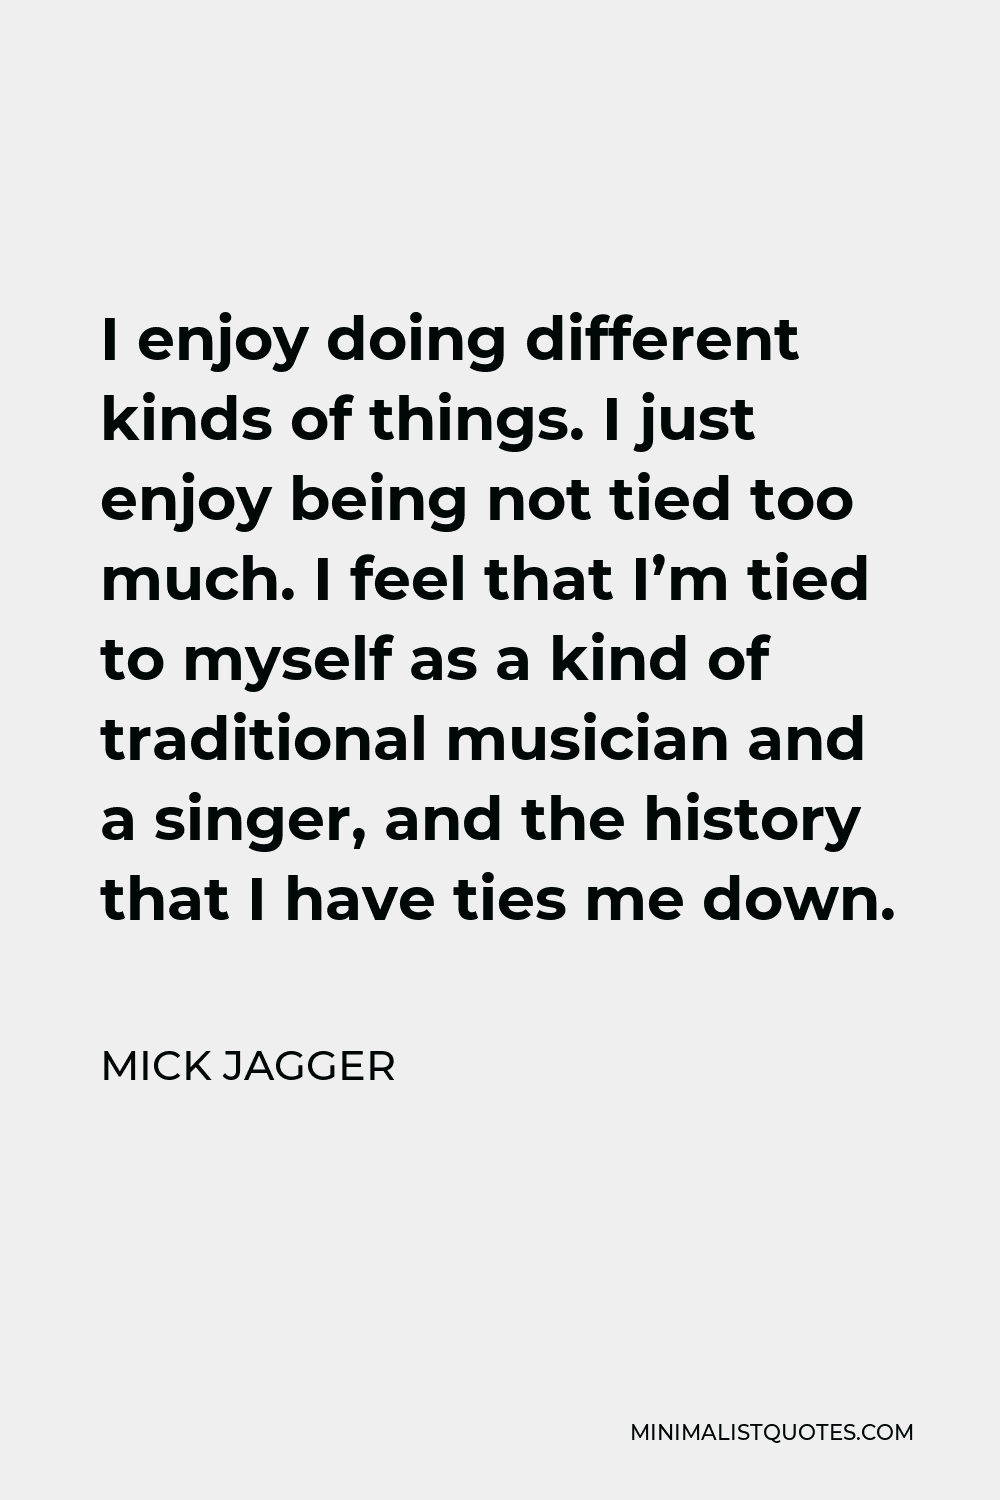 Mick Jagger Quote - I enjoy doing different kinds of things. I just enjoy being not tied too much. I feel that I’m tied to myself as a kind of traditional musician and a singer, and the history that I have ties me down.